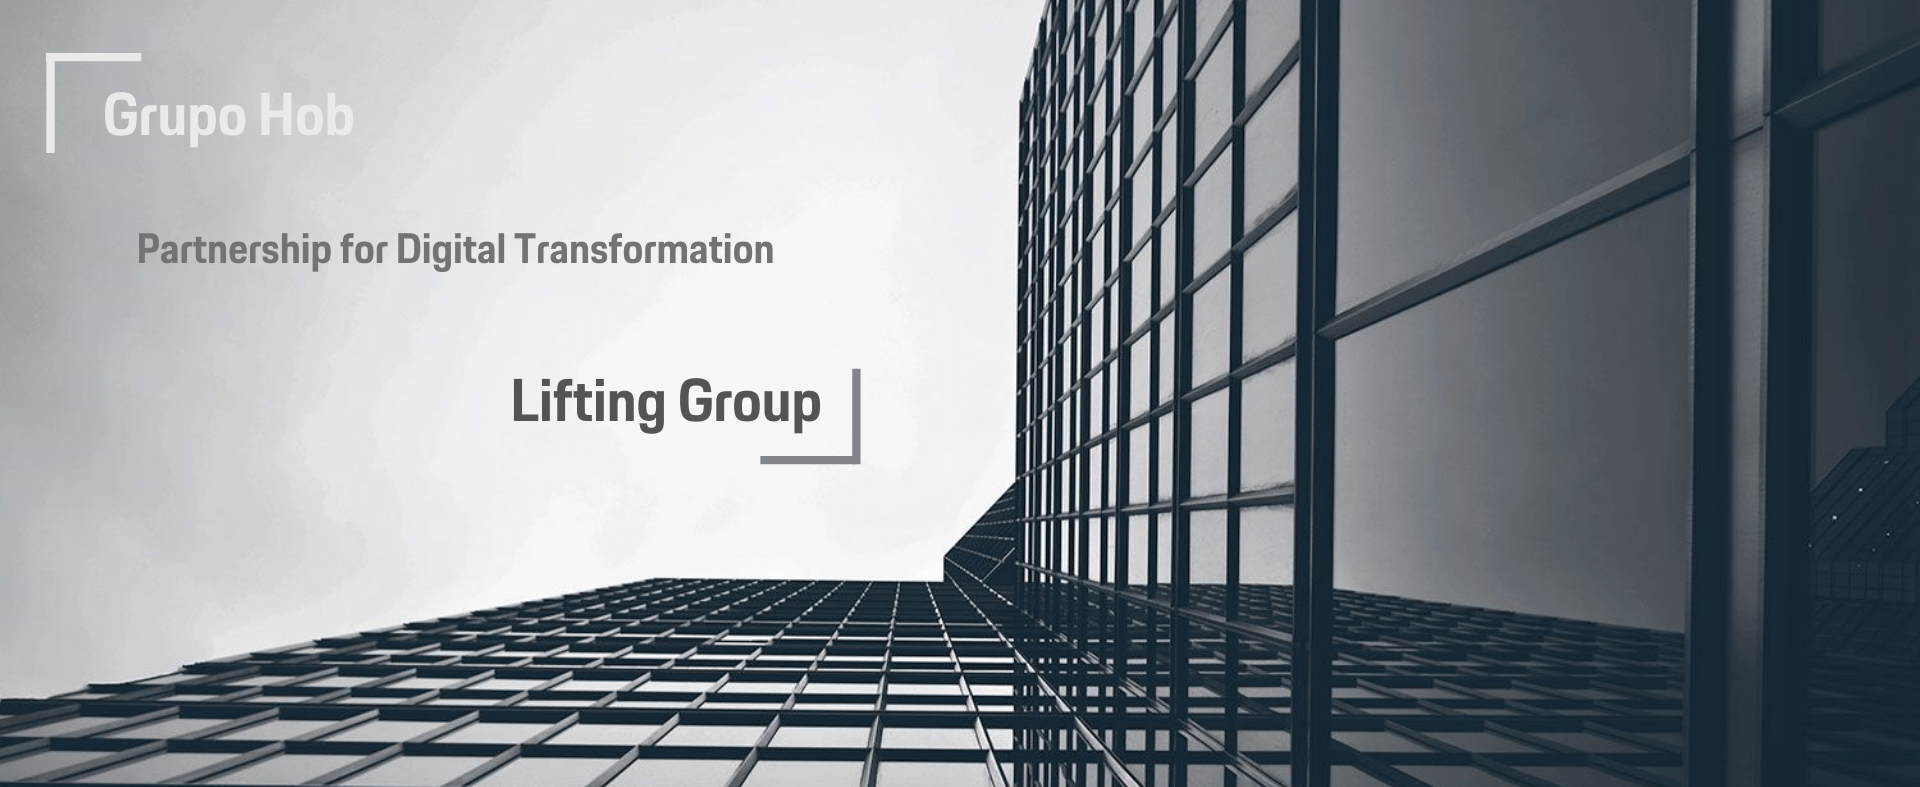 Grupo Hob & Lifting Group, add synergies in the digital transformation for companies in the province of Alicante.